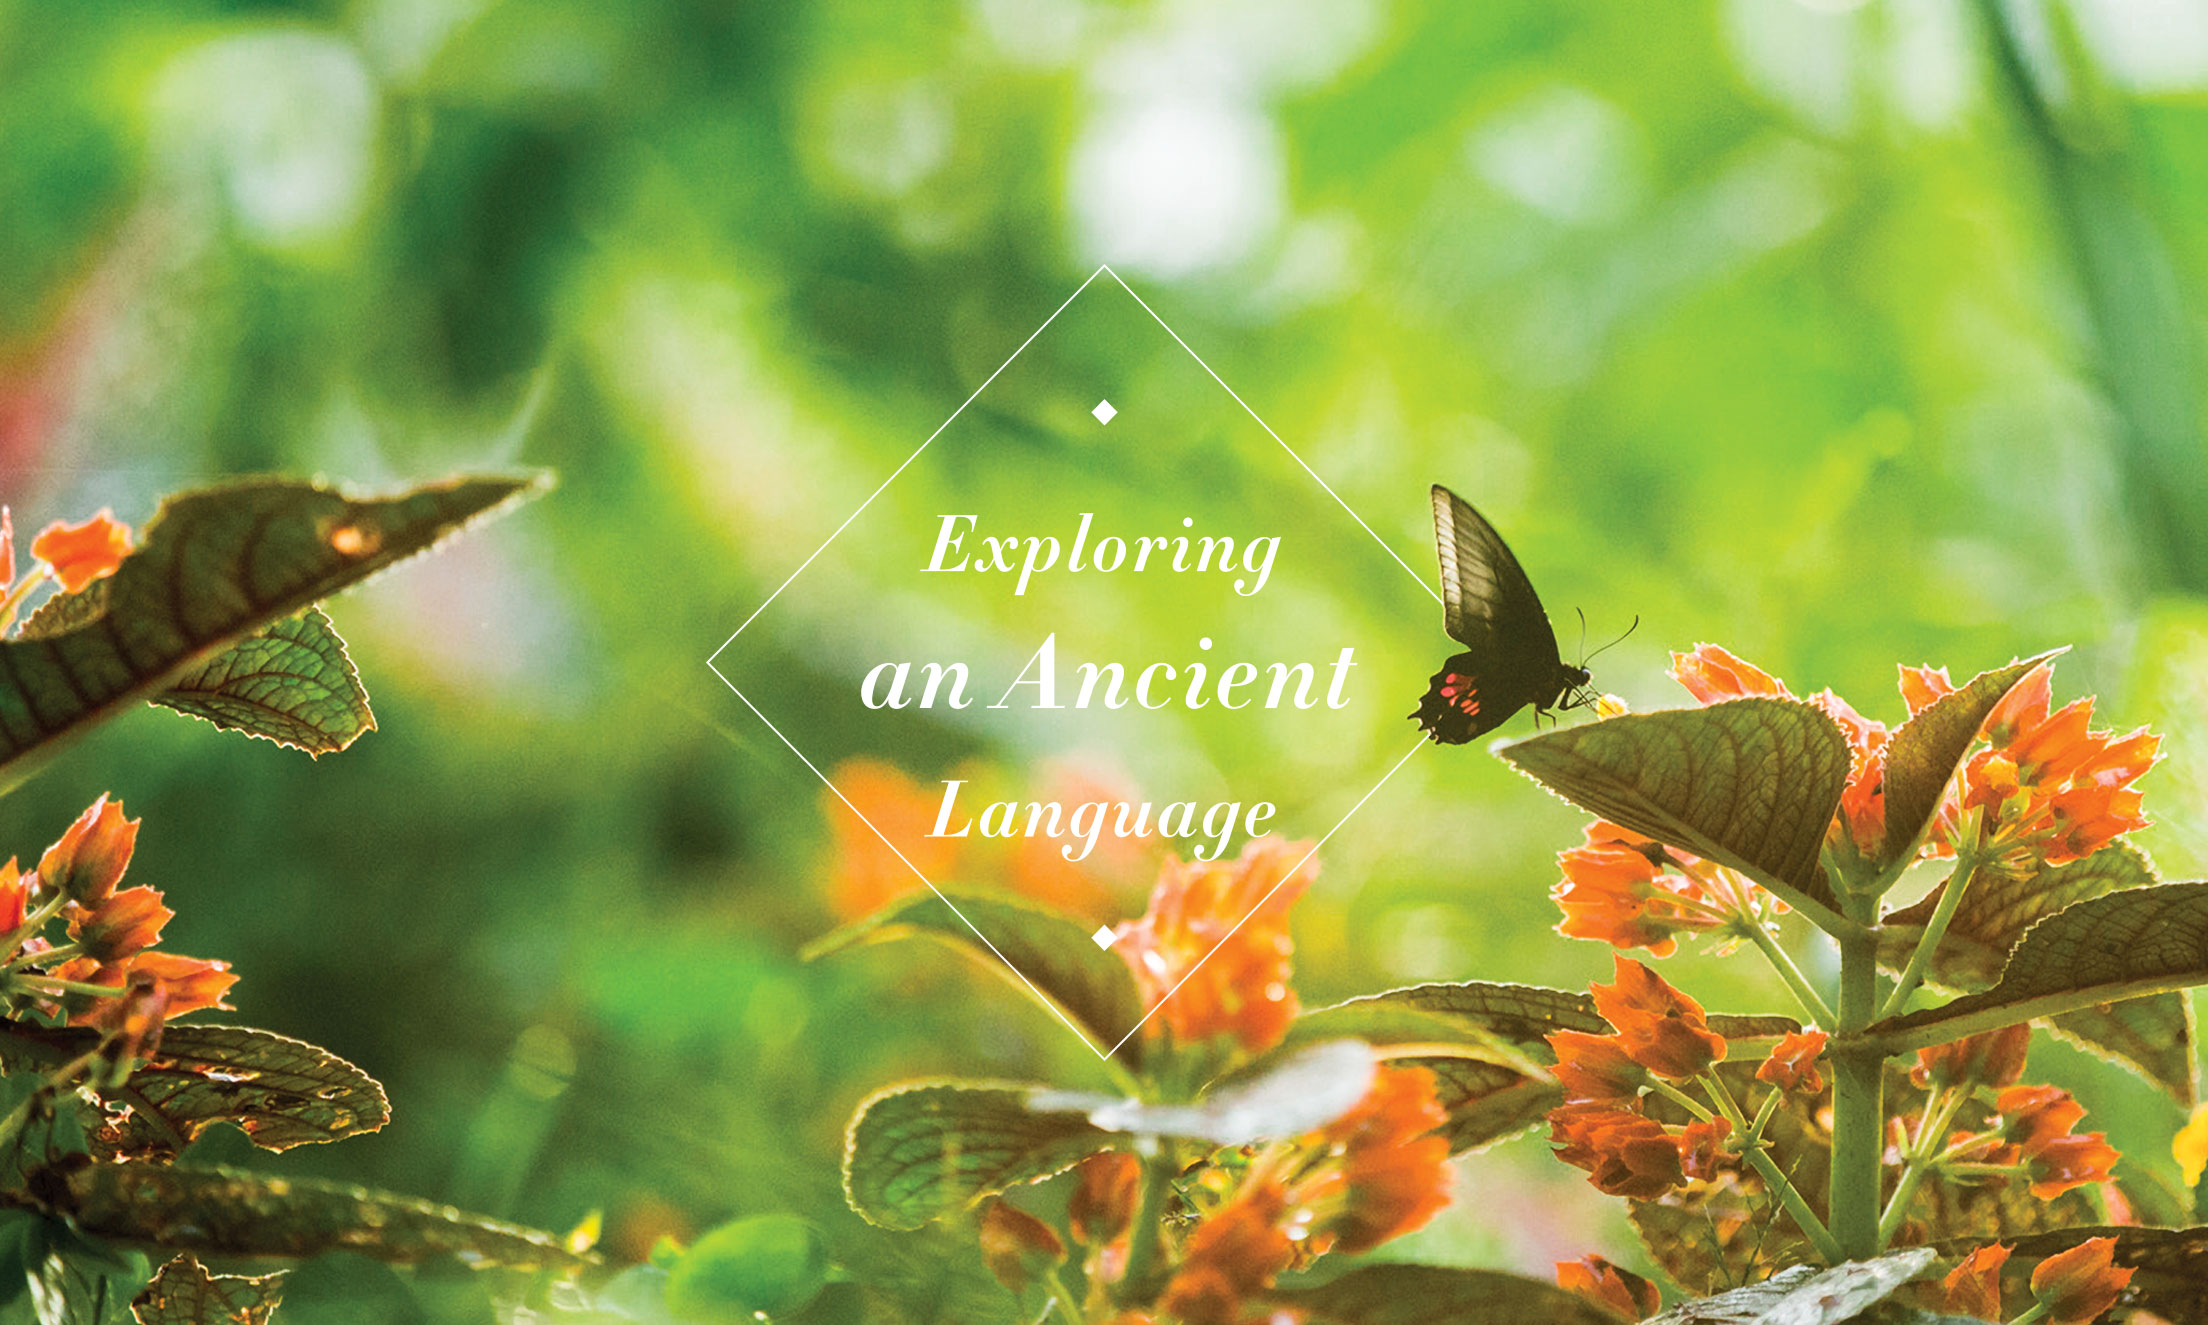 Butterfly lading on a flower in an Ecuador rainforest with headline, "Exploring an Ancient Language," superimposed on top of the image